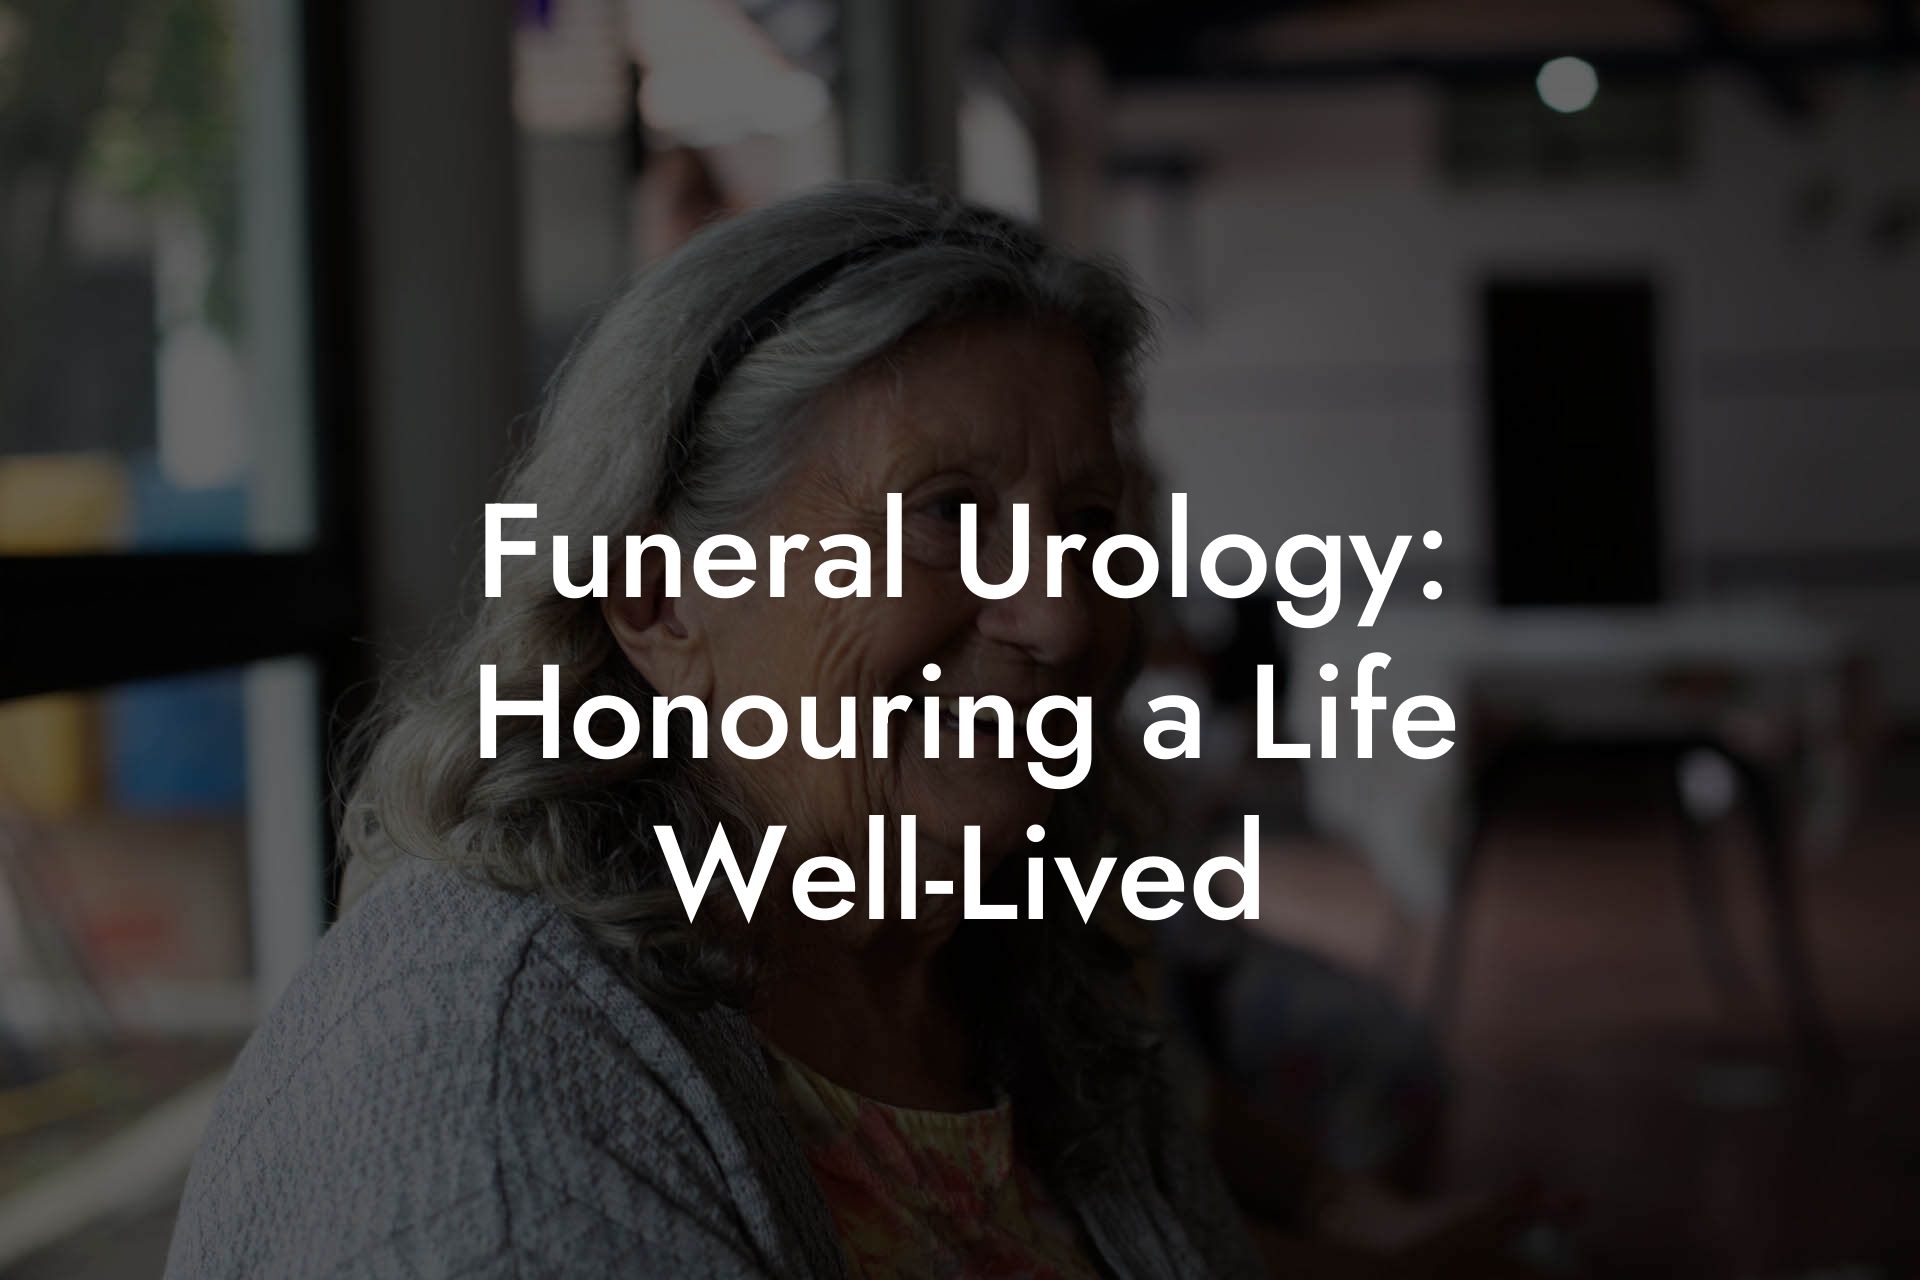 Funeral Urology: Honouring a Life Well-Lived